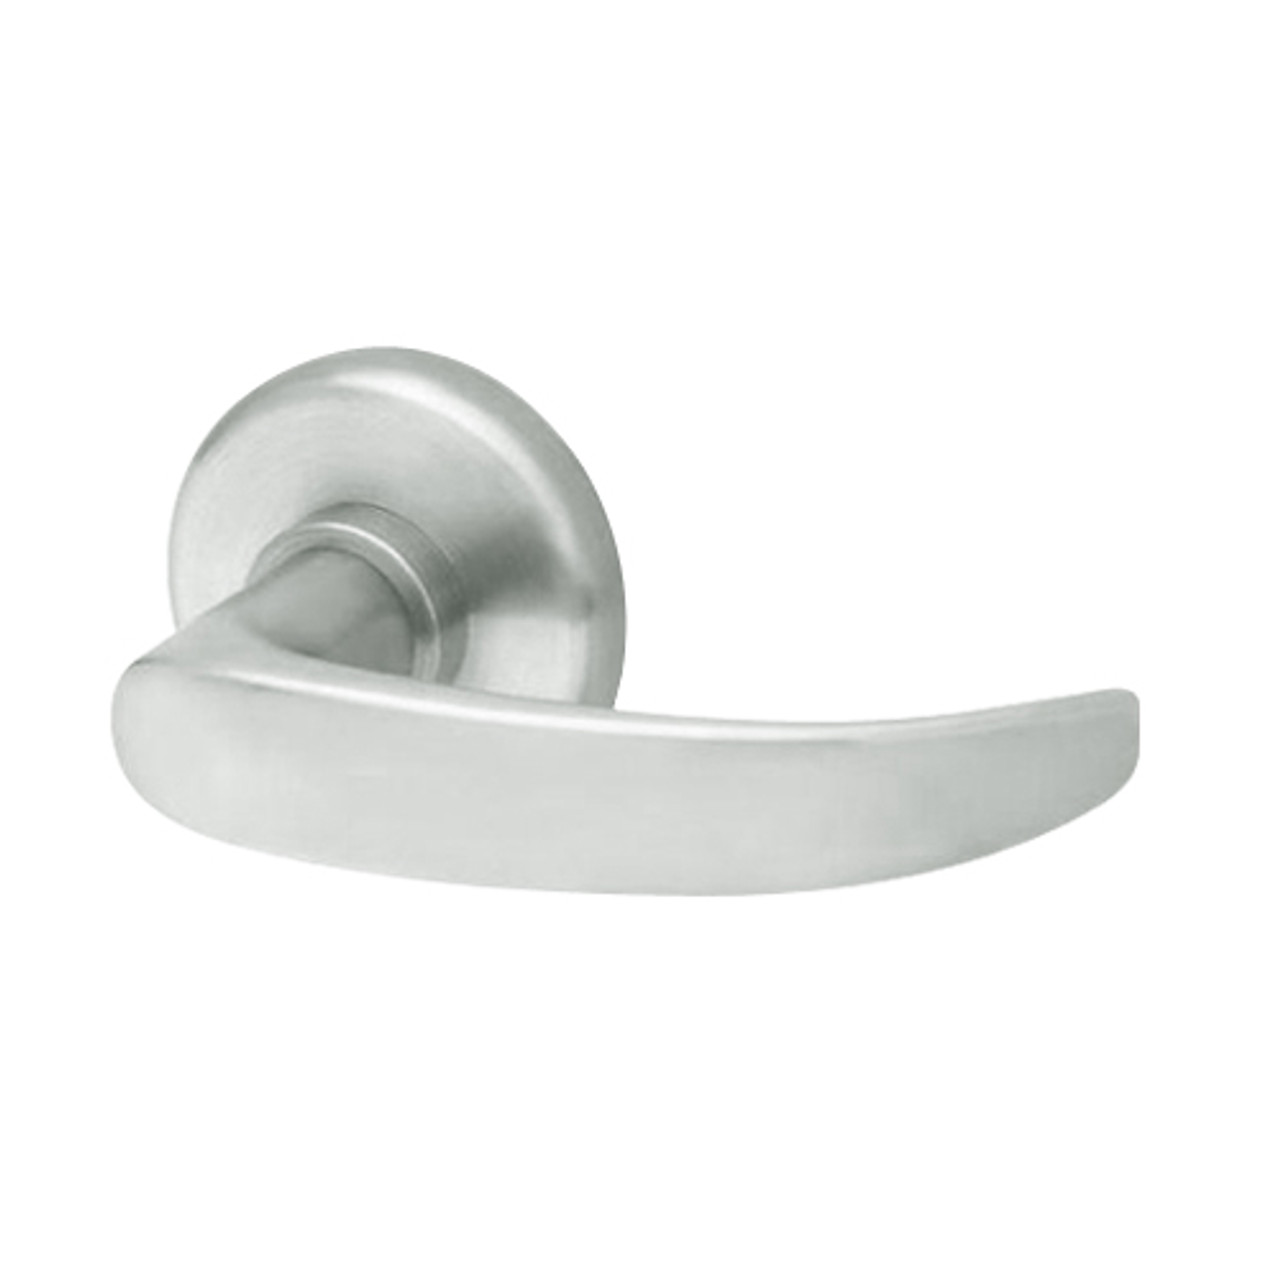 40HTKOS314S618 Best 40H Series Trim Kits Outside Lever w/ Emergency Plate with Curved Return Style in Bright Nickel